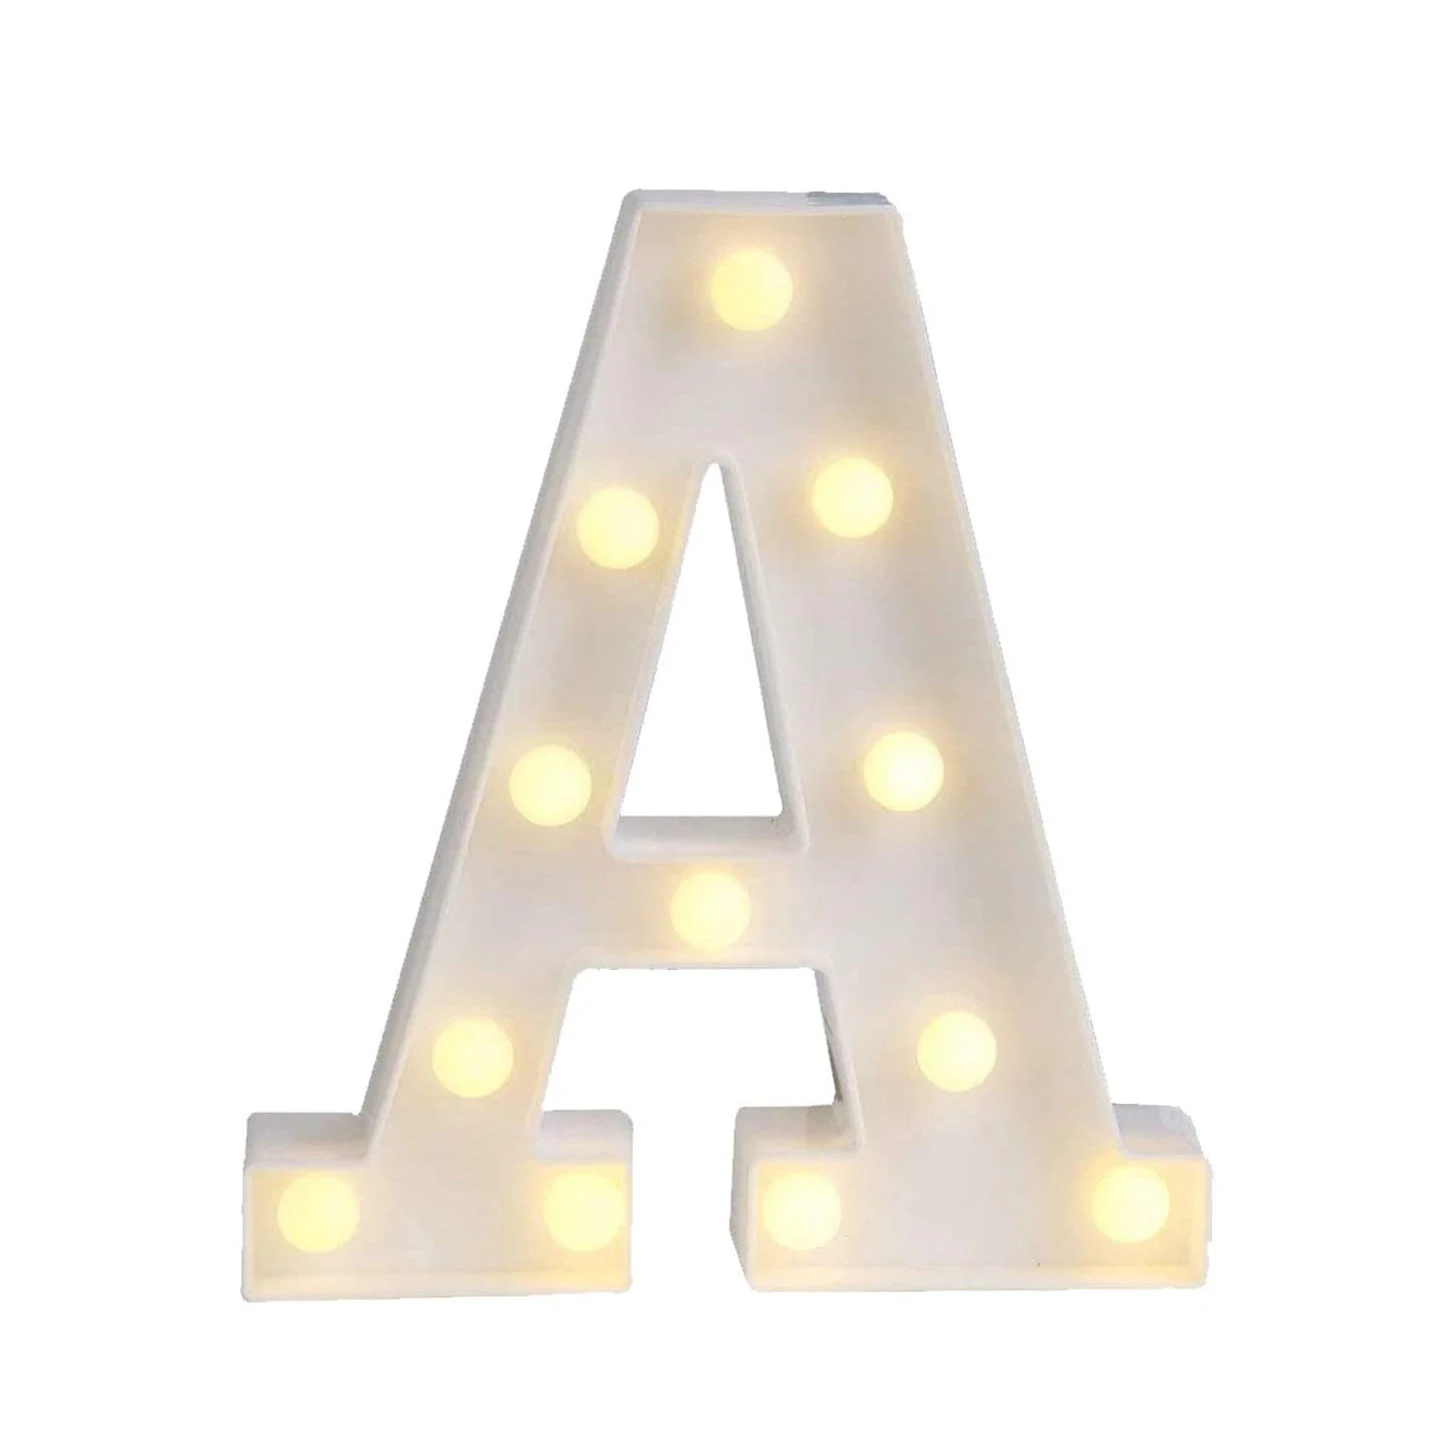 Wholesale High Quality Waterproof Light Up Letter Sign Home Decoration Marquee Led Alphabet Letter Lights For Christmas Wedding